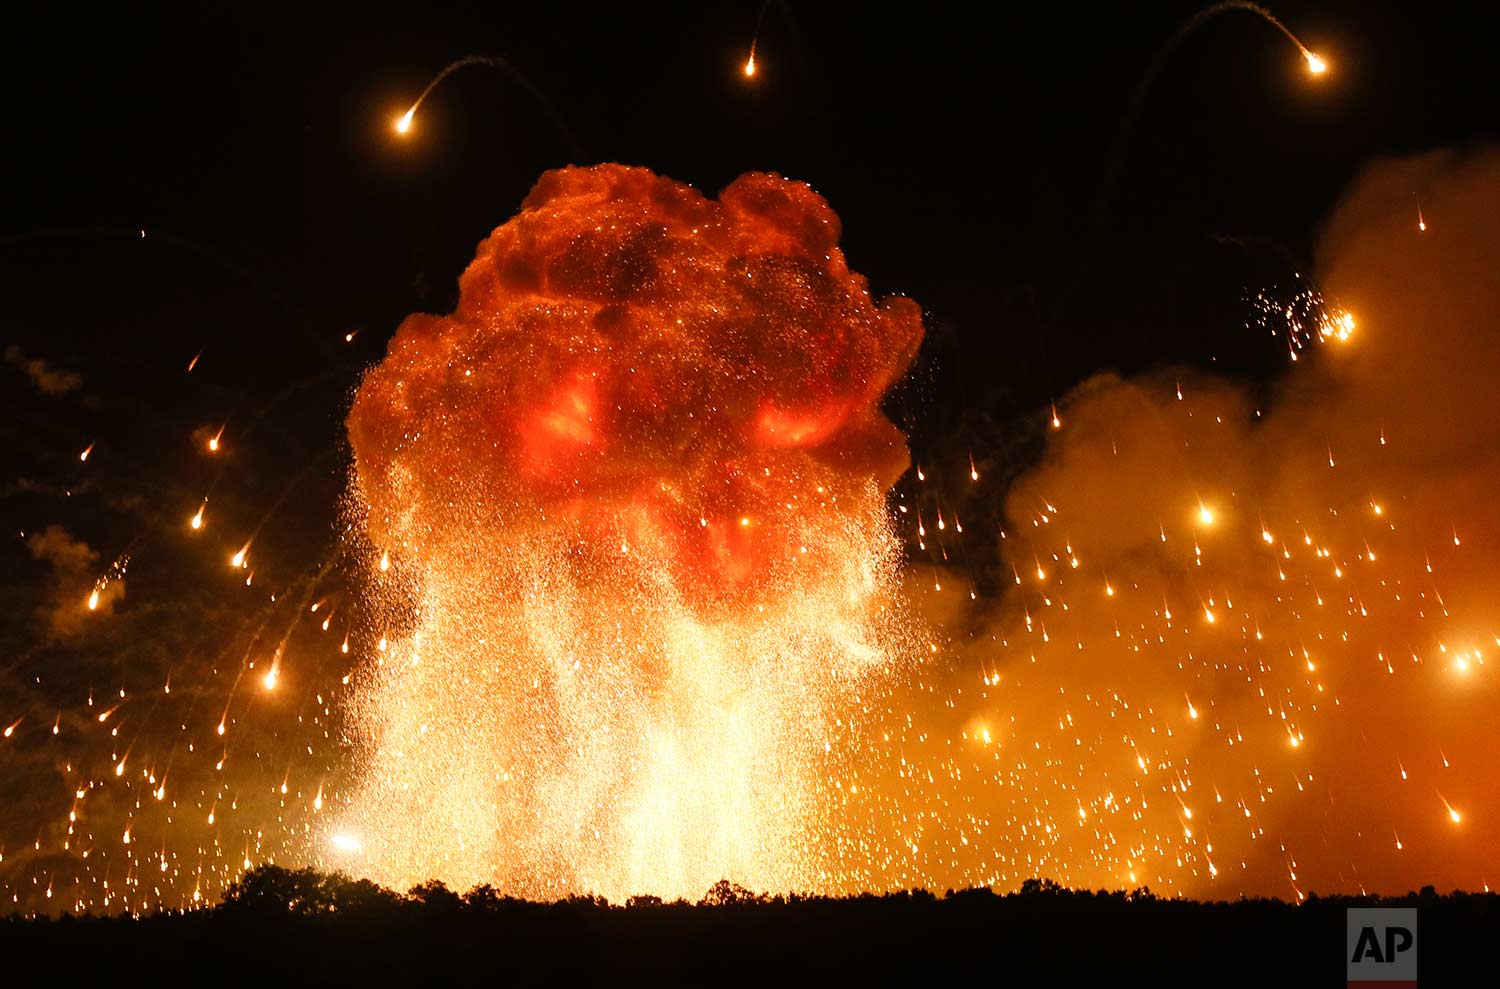  In this Wednesday, Sept. 27, 2017 photo, a powerful explosion is seen in the ammunition depot at a military base in Kalynivka, west of Kiev, Ukraine.  Ukrainian officials say they have evacuated more than 30,000 people after a fire and ammunition ex